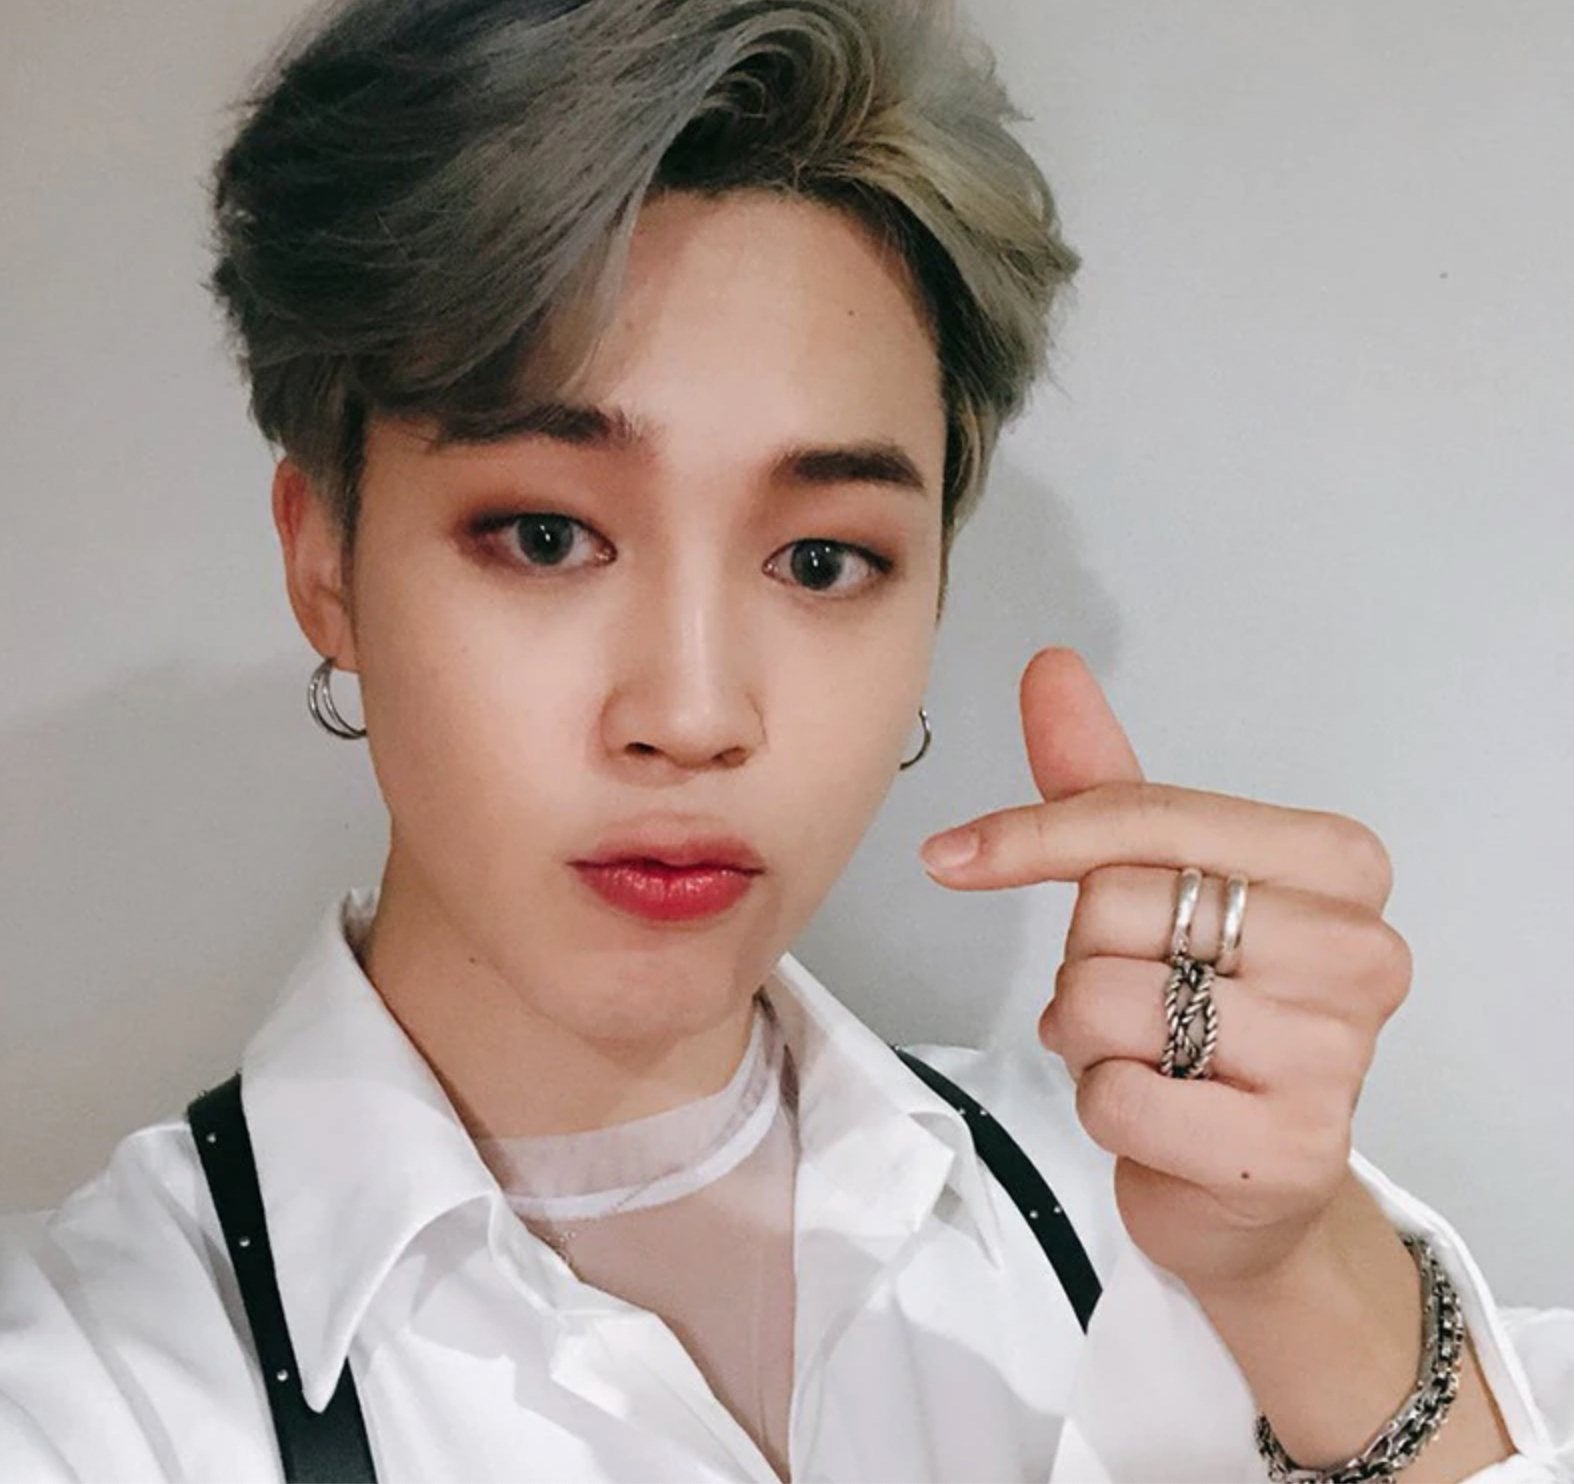 Buy University Trendz Black BTS Jimin Stainless Steel Ring Combo with Jimin  Signature Bracelet (Pack of 2) at Amazon.in